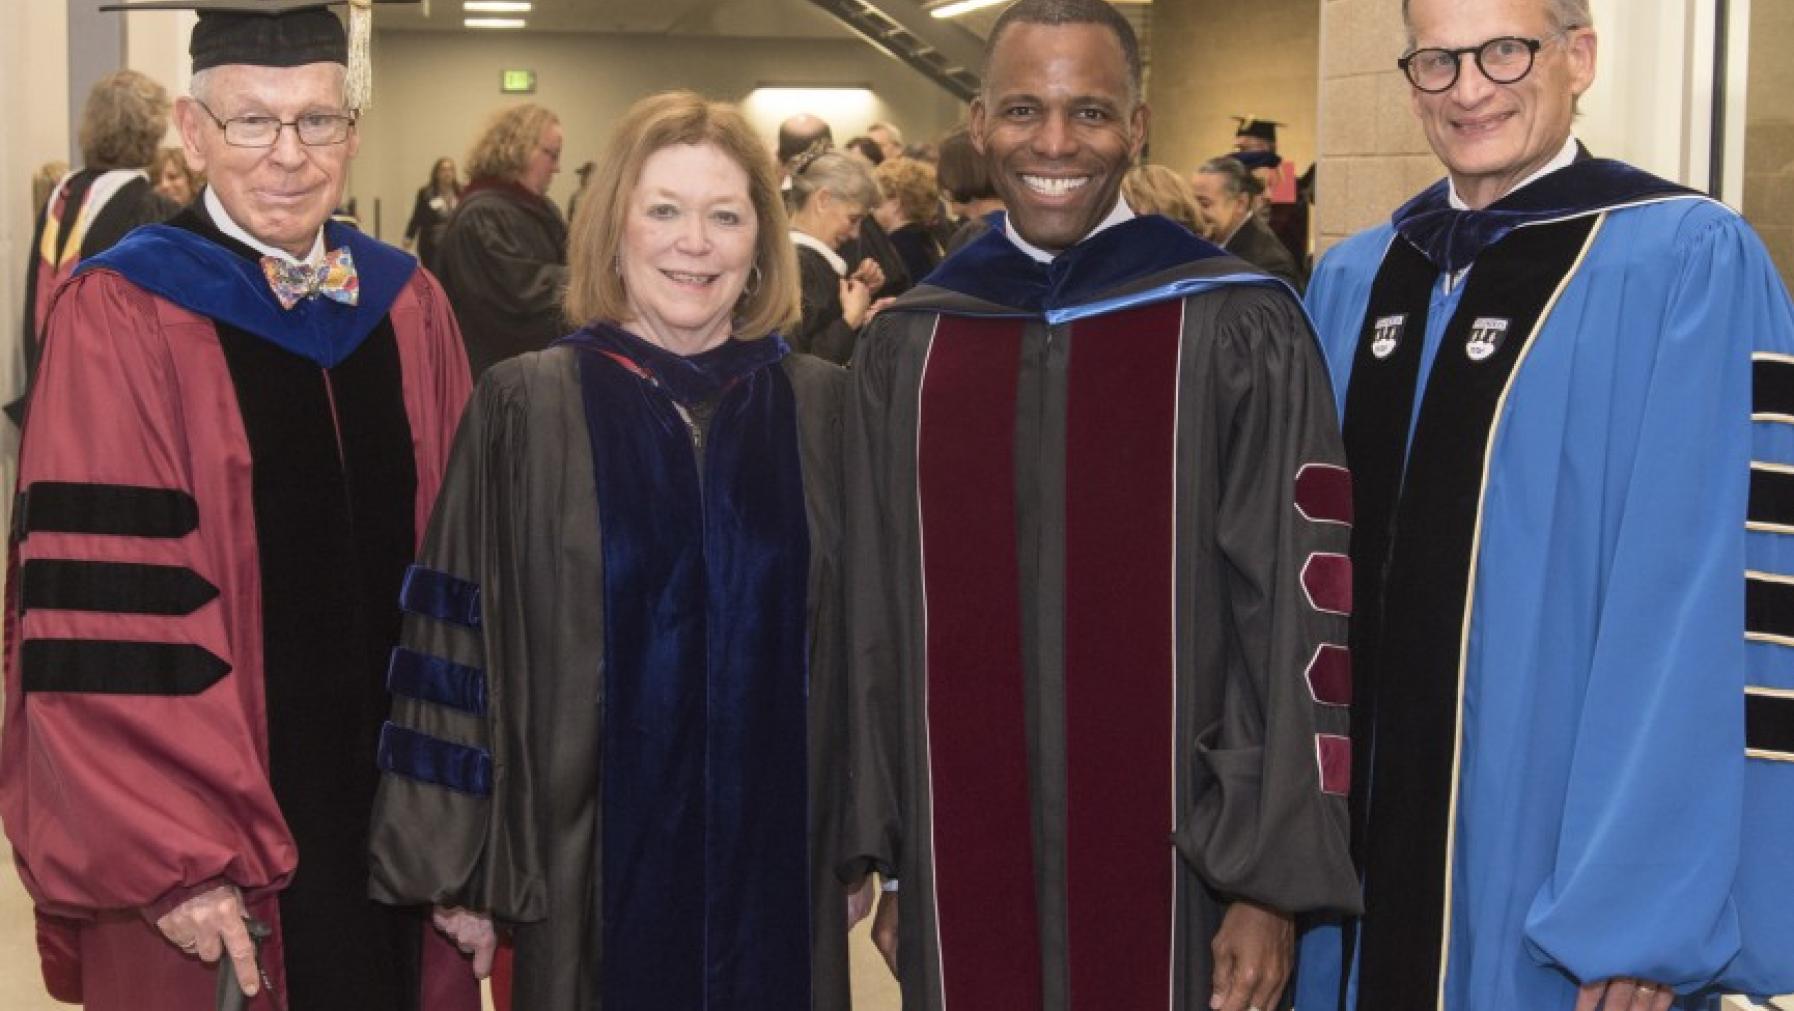 Four university presidents, all together for a day of celebration: Phil Phibbs, Susan Resneck Pierce, Isiaah Crawford, and Ron Thomas. Photo by Ross Mulhausen.